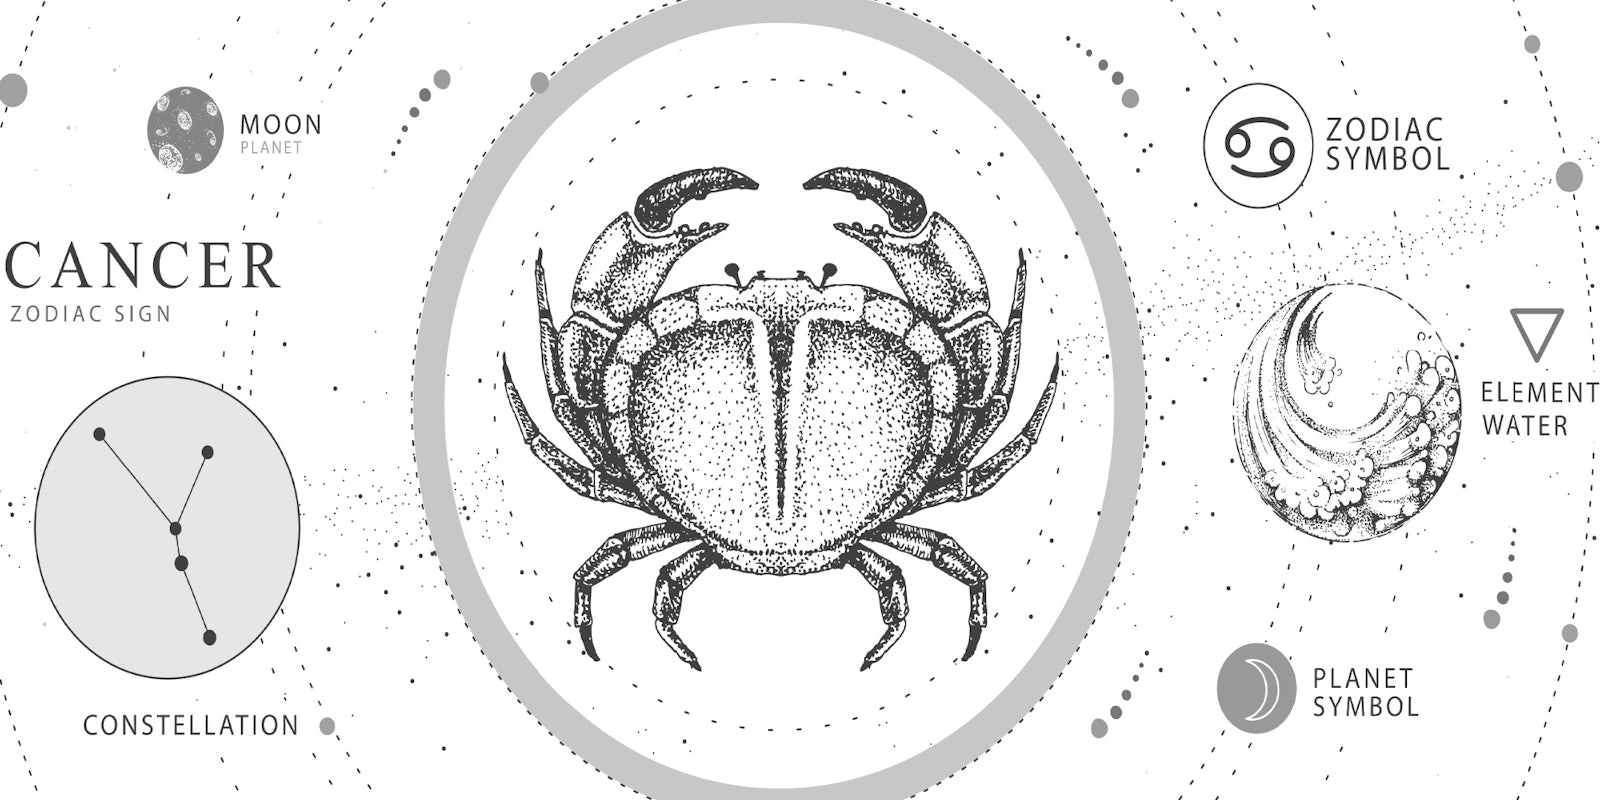 Cancer zodiac sign symbols and preliminary astrology info. Illustration of a crab sits in the center of the image with the constellation and zodiac symbols placed on the outer edges.